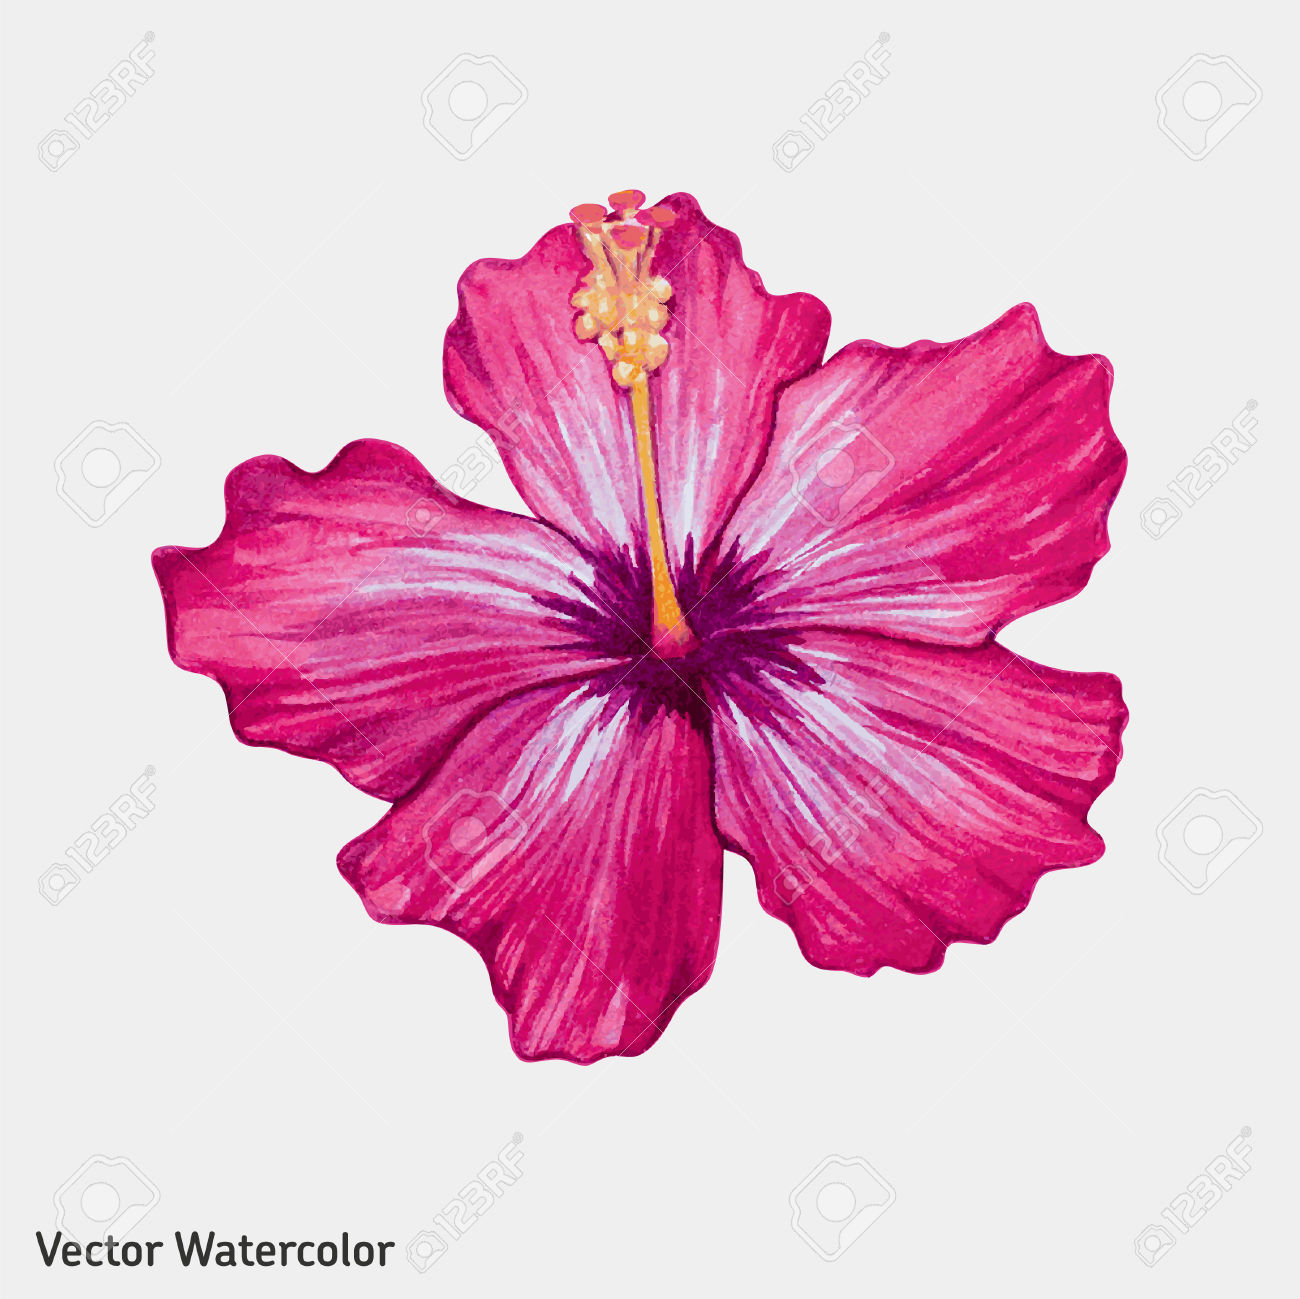 Watercolor Pink Hibiscus Flower. Vector Illustration. Royalty Free.